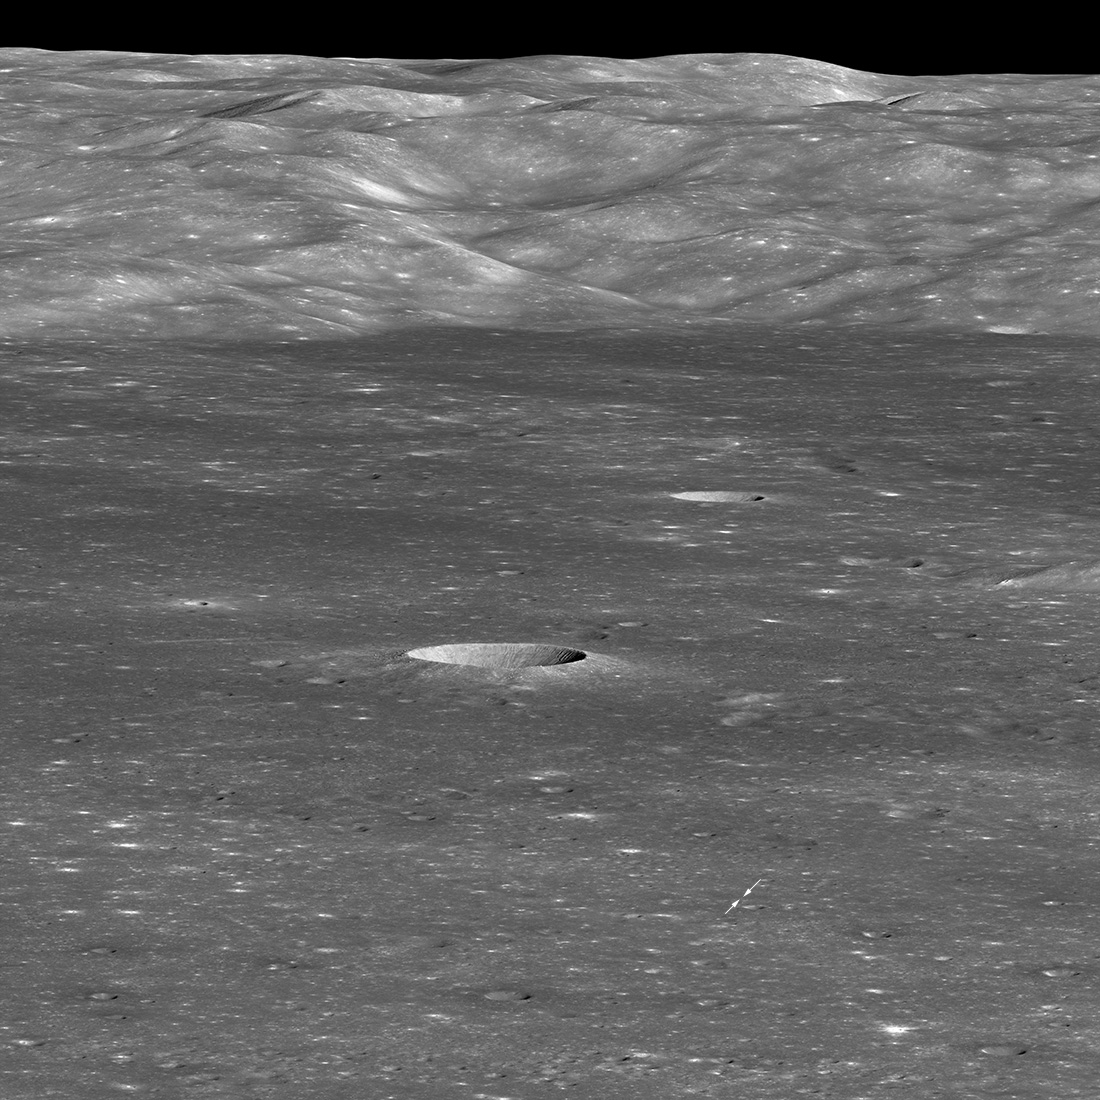 A grayscale photo of the surface of the Moon, showing the landing site of the Chinese spacecraft Chang'e 4. A large crater is prominent in the center of the image and a mountain range leading to a black sky at the top. The lunar surface is mostly flat, with many small craters and some larger ones visible. leading up to the mountains, which gradually change from foothills to tall mountains near the top edge. Below and to the right of the center crater, two tiny white arrows show the Chang'e landing site.